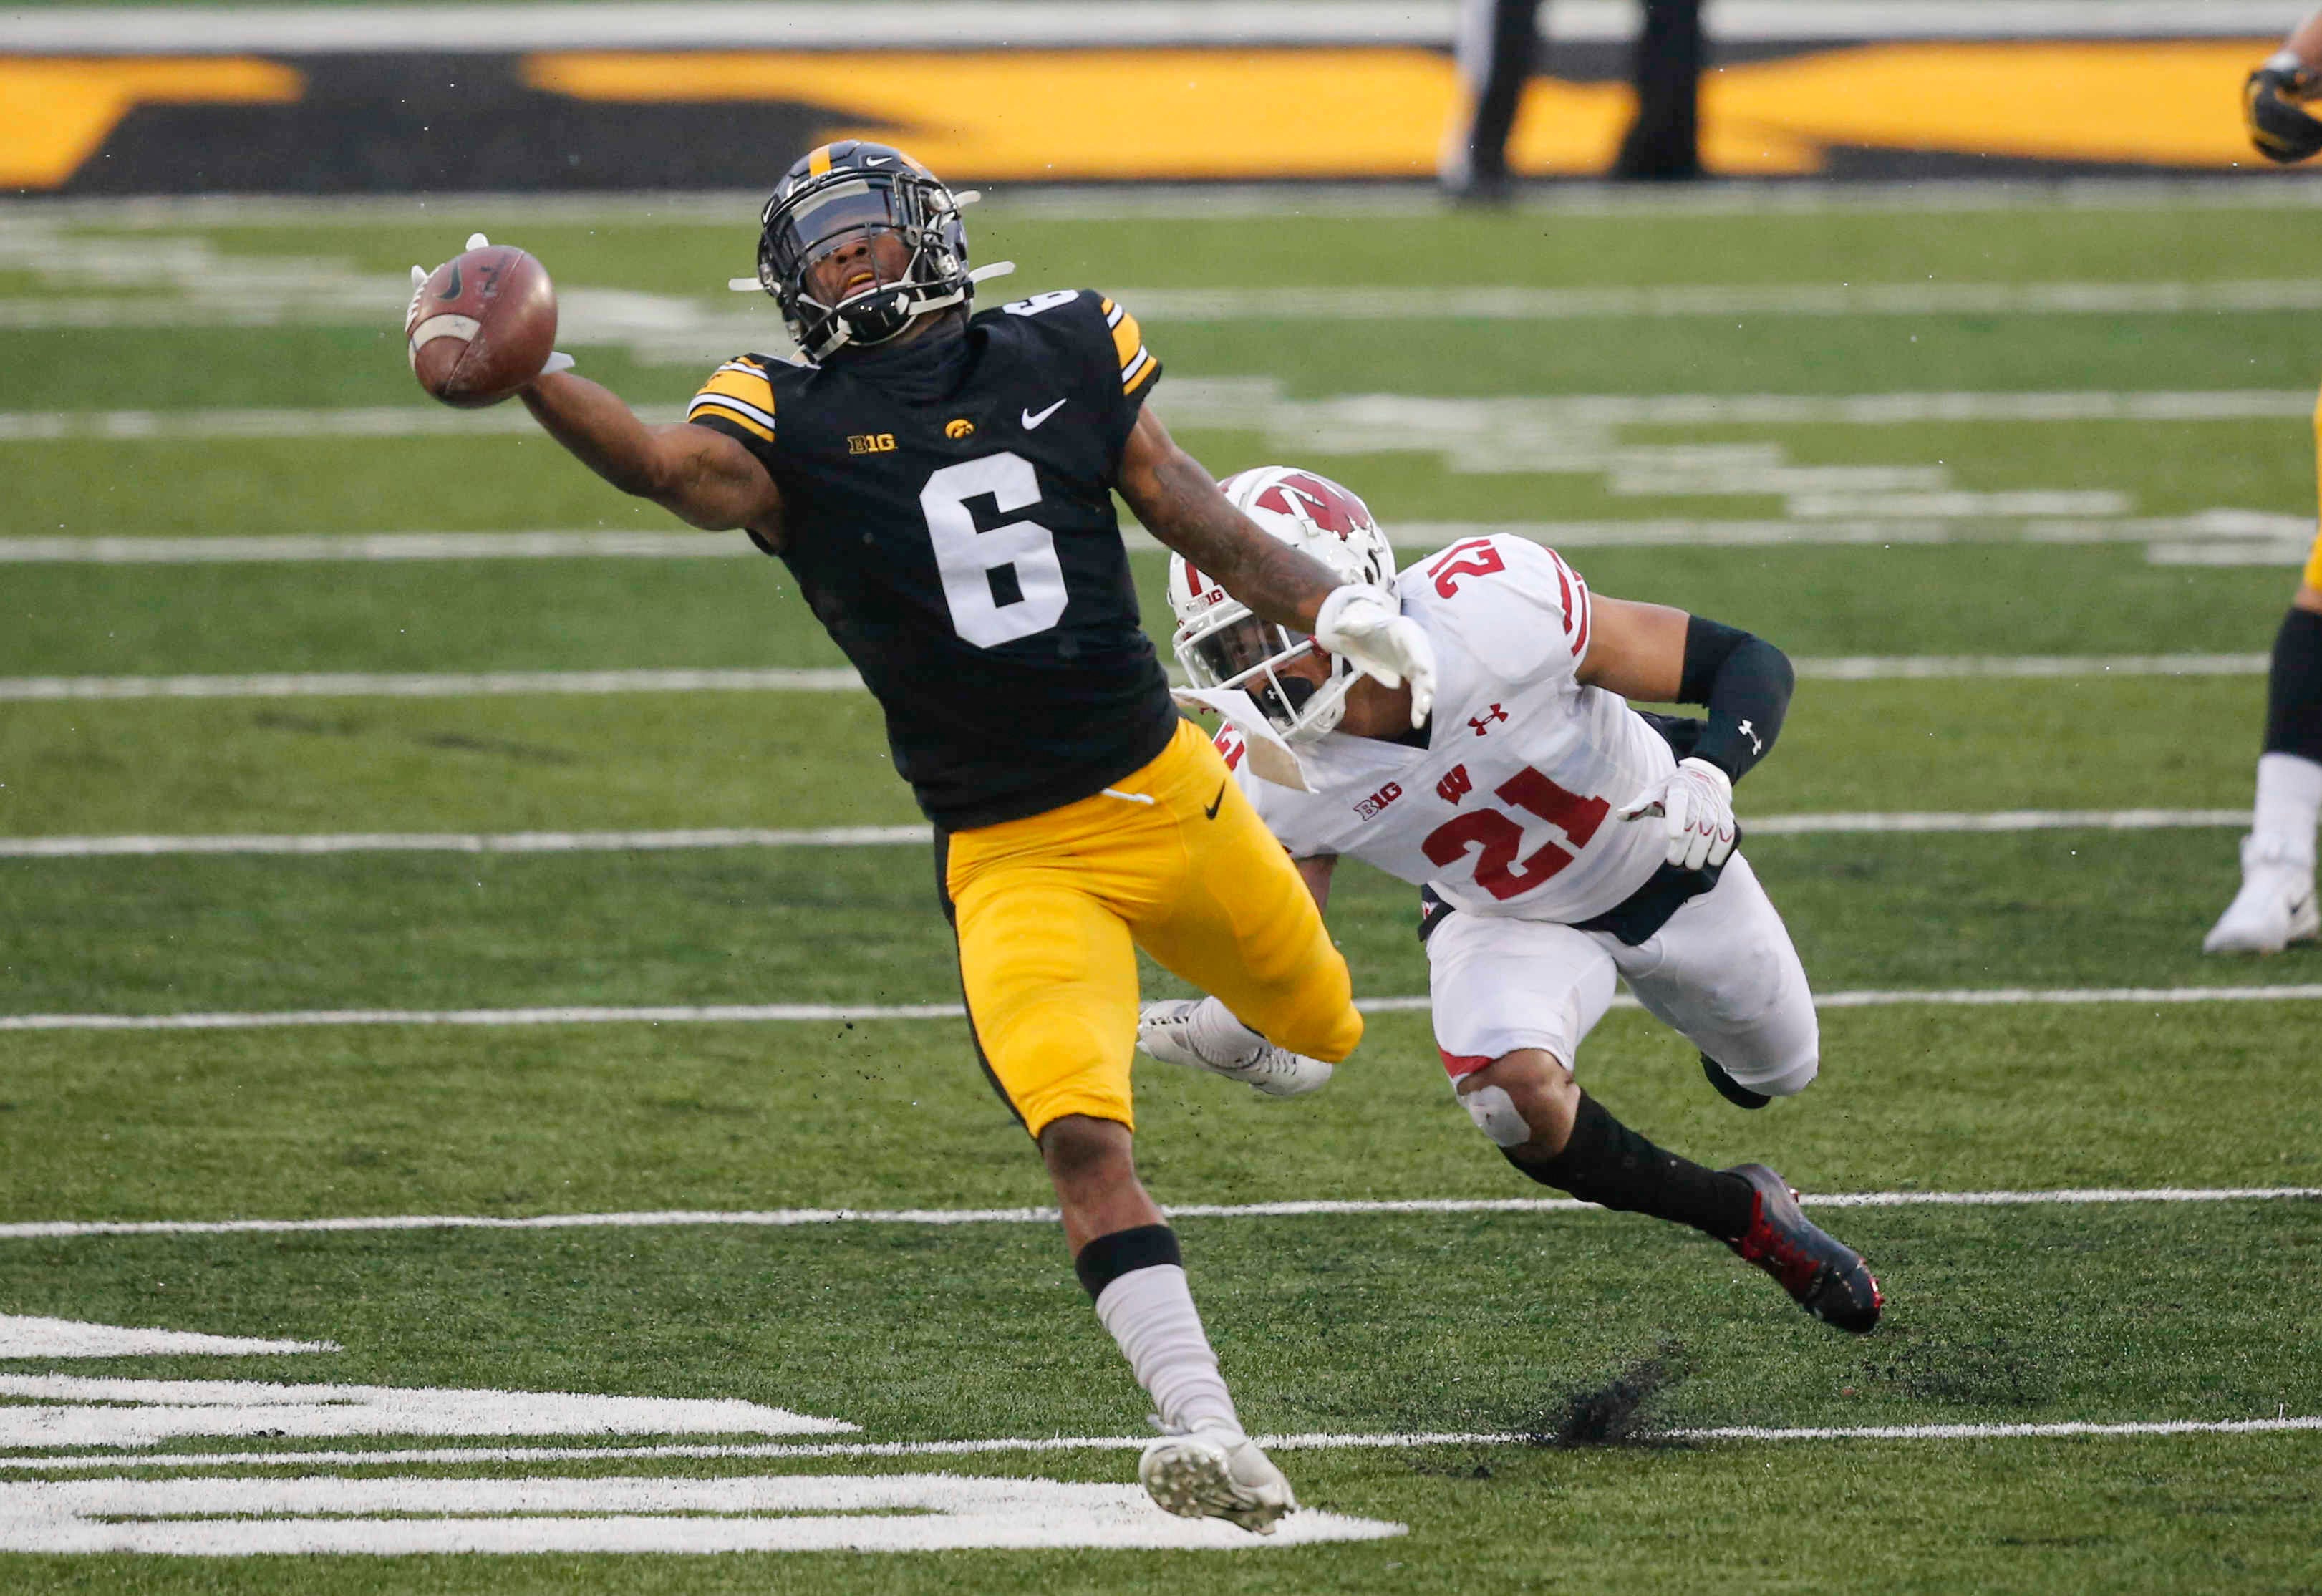 Iowa senior receiver Ihmir Smith-Marsette reaches for an overthrown pass in the second quarter against Wisconsin on Saturday, Dec. 12, 2020, at Kinnick Stadium in Iowa City, Iowa.